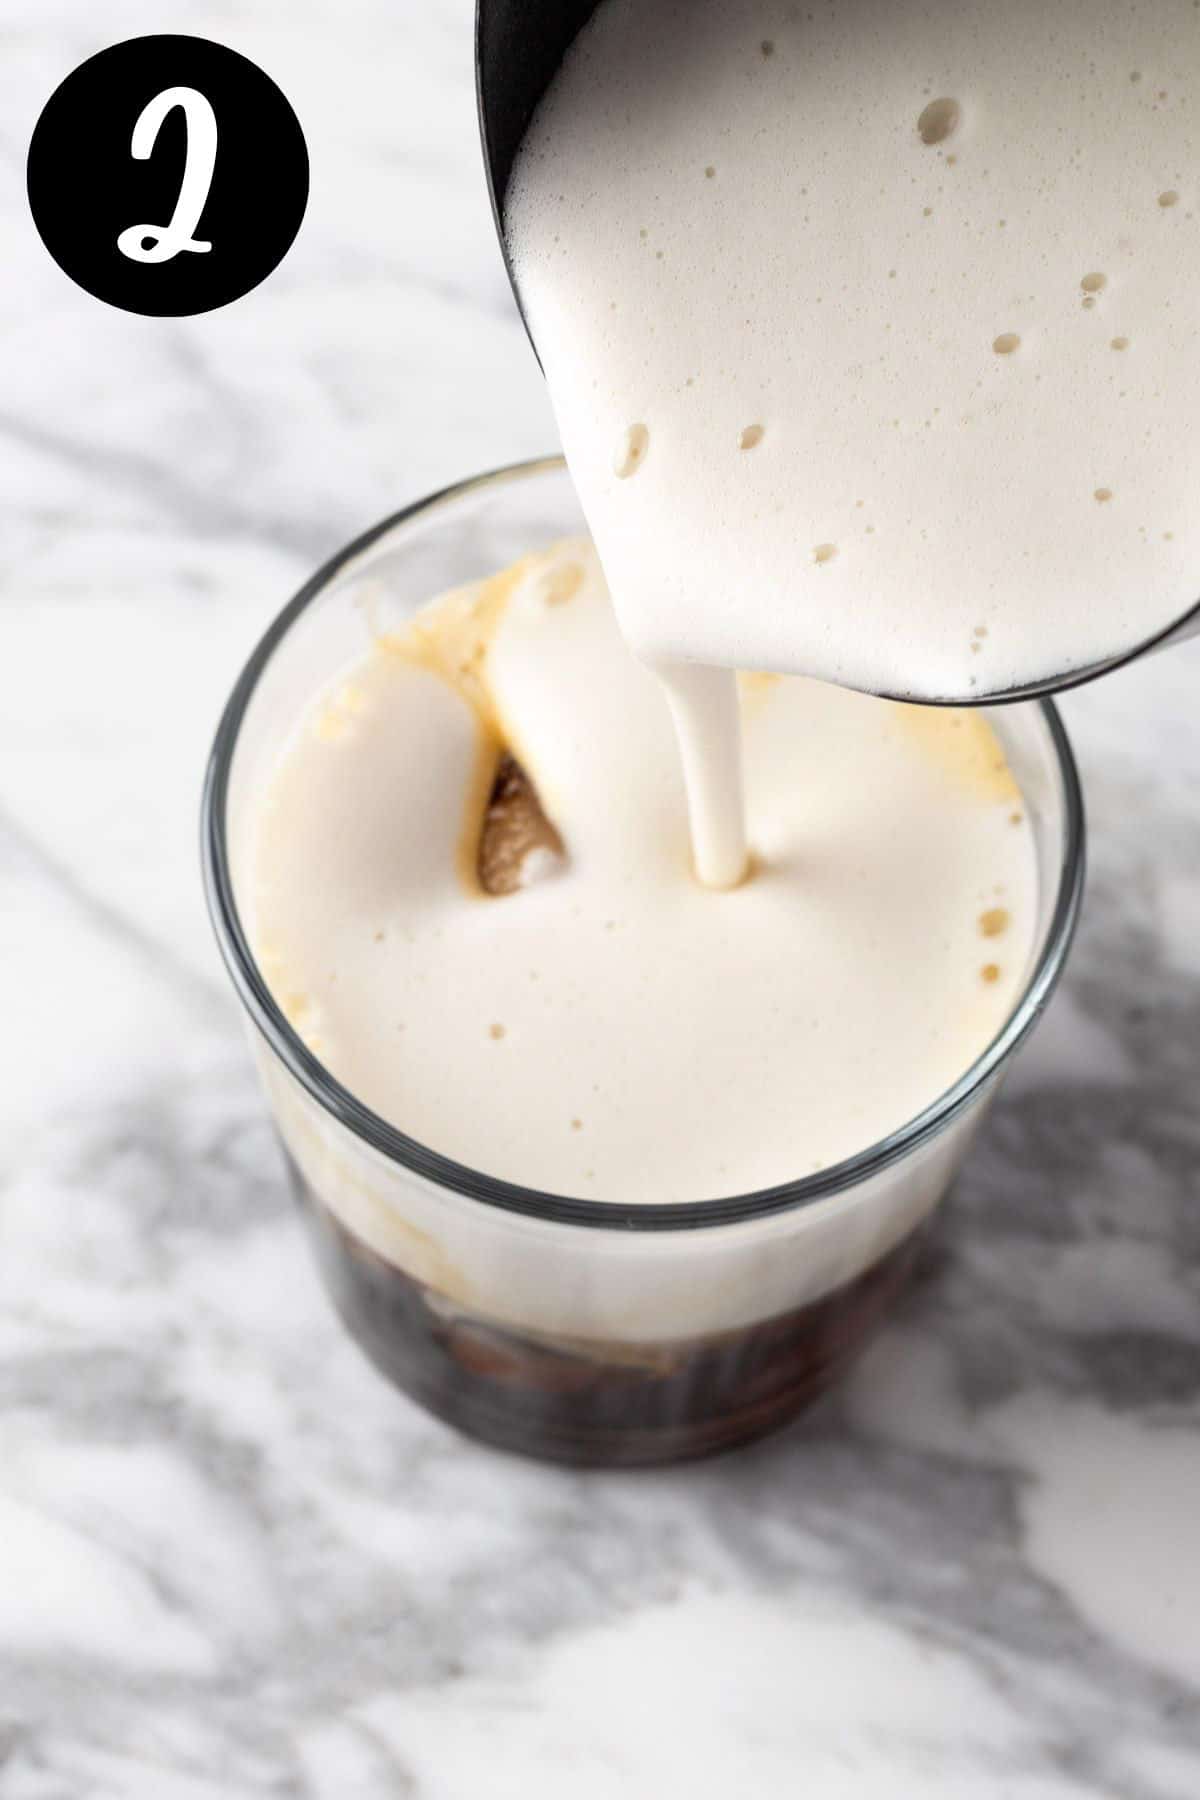 Pouring the frothed gingerbread milk on top of the chilled espresso.